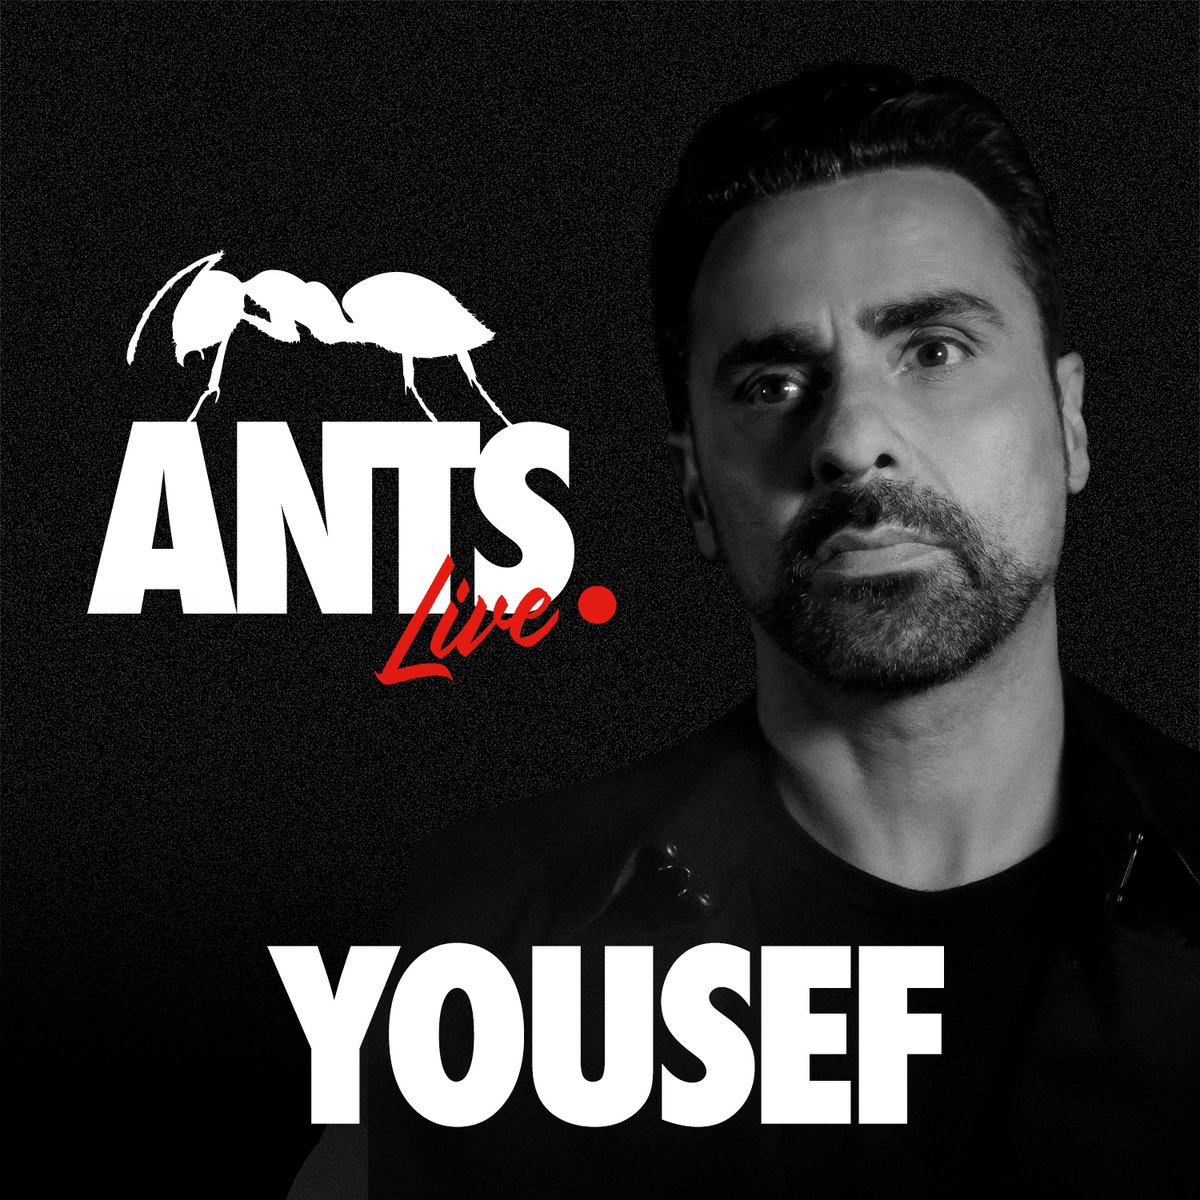 ANTS series of DJ Mixes recorded live at Ushuaïa Ibiza continues with a brand new one by @yousefcircus 🐜🖤 Stream now: l.unitedants.com/fpDENX #AppleMusic #UshuaiaIbiza #AntsInvasion #LiveMixes